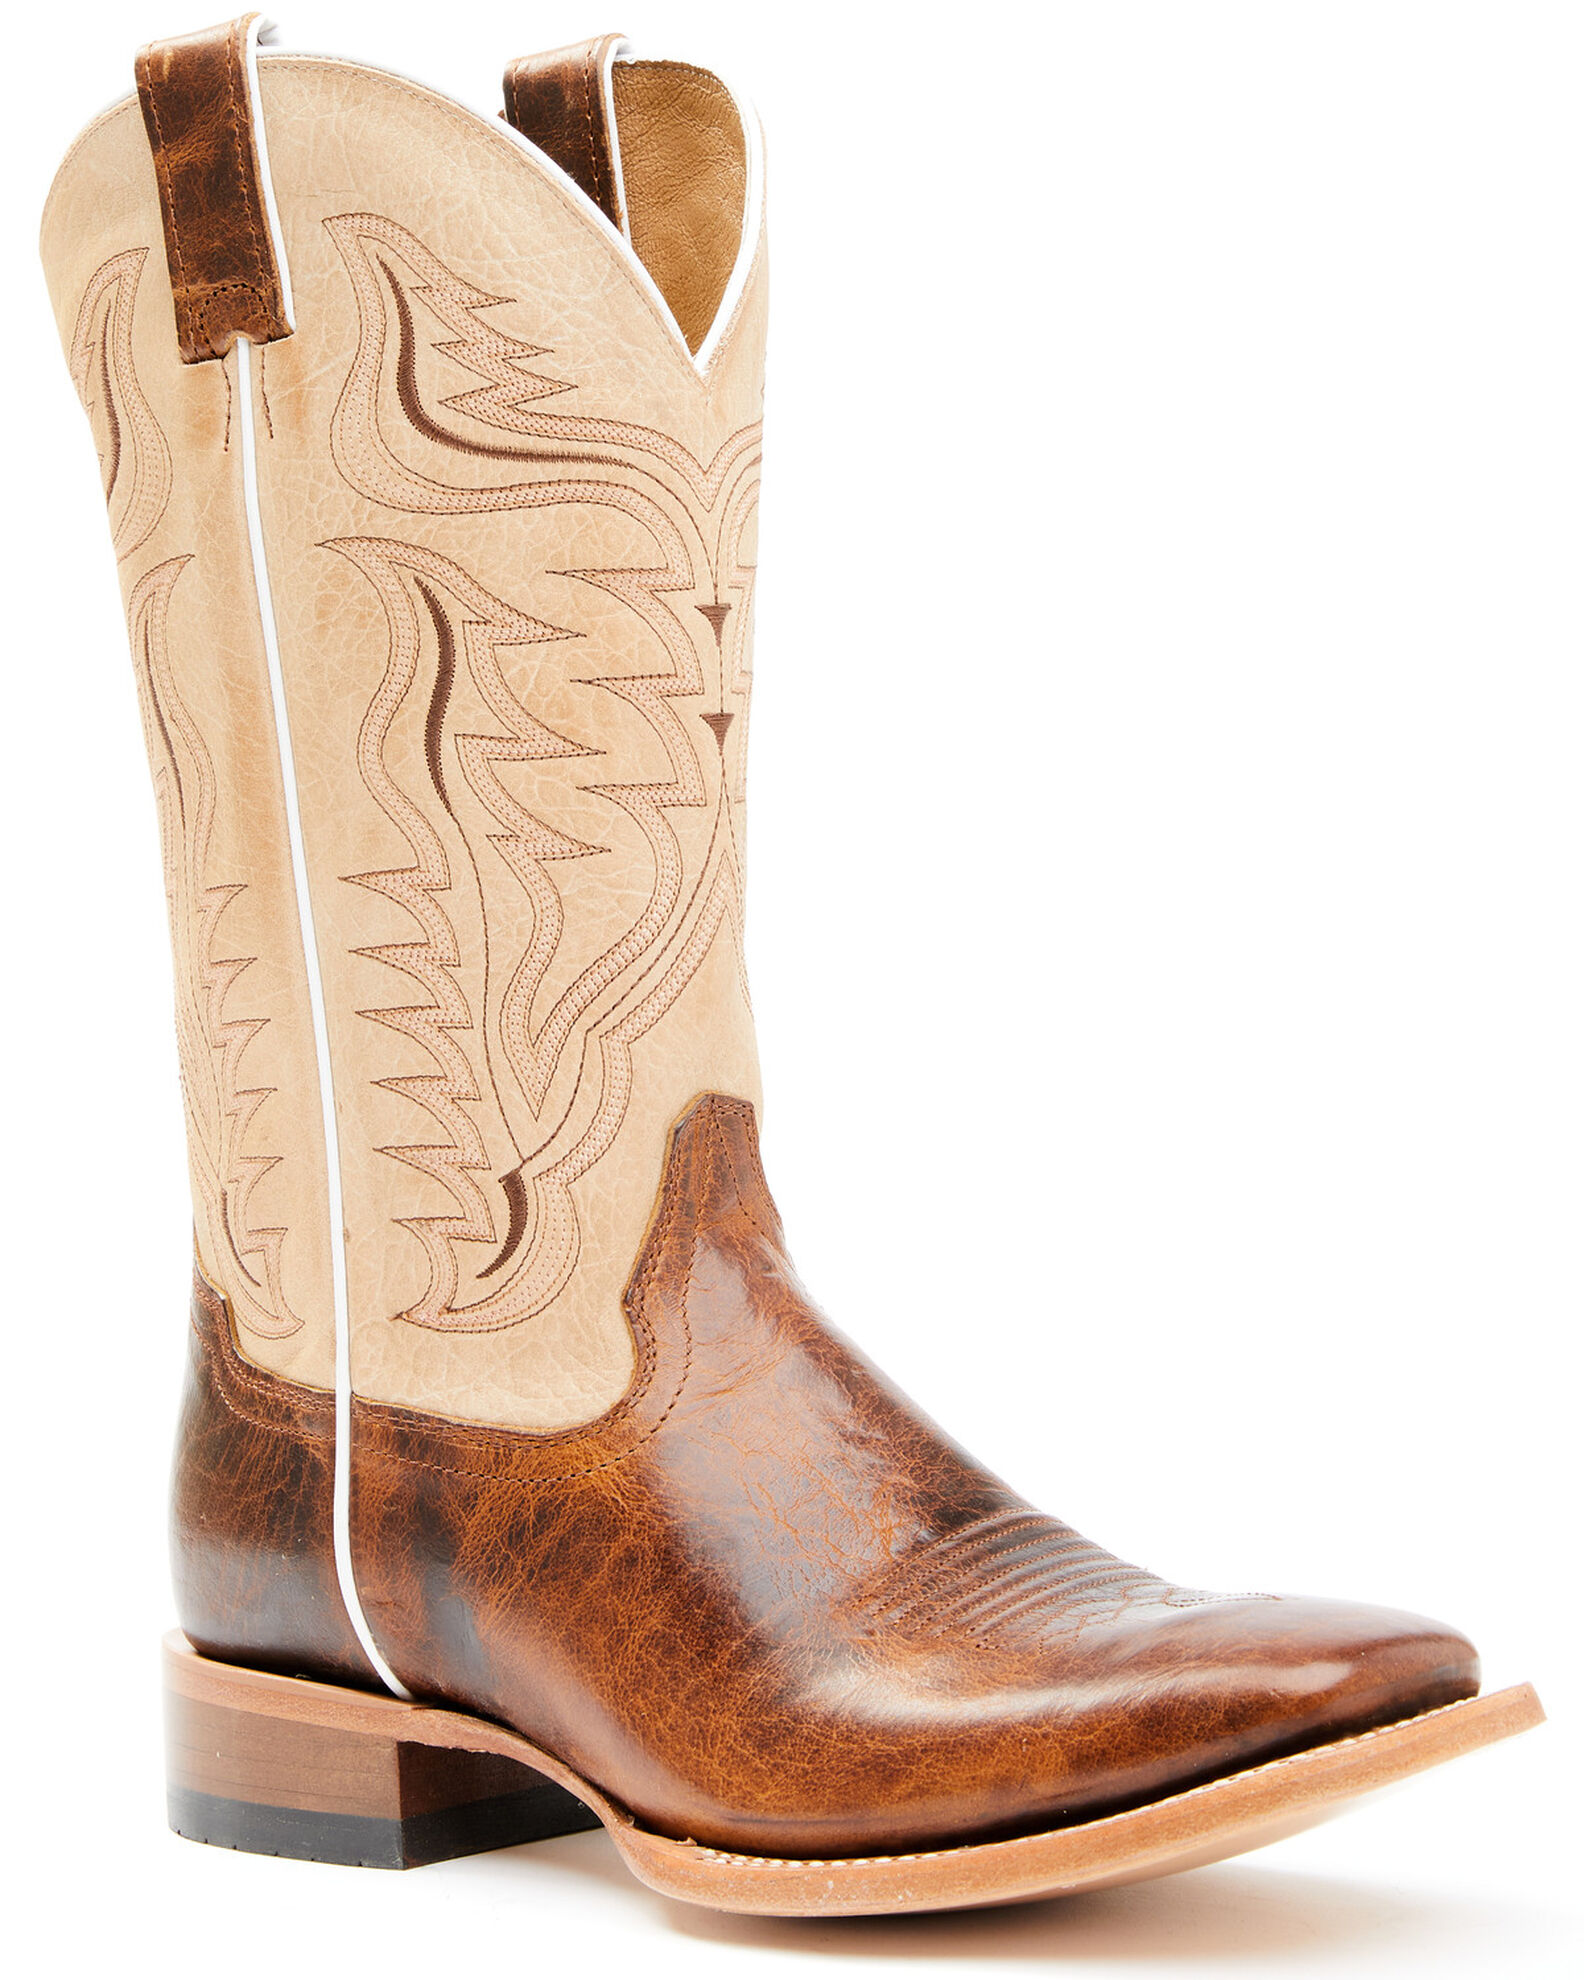 Product Name: Cody James® Men's Square Toe Western Boots